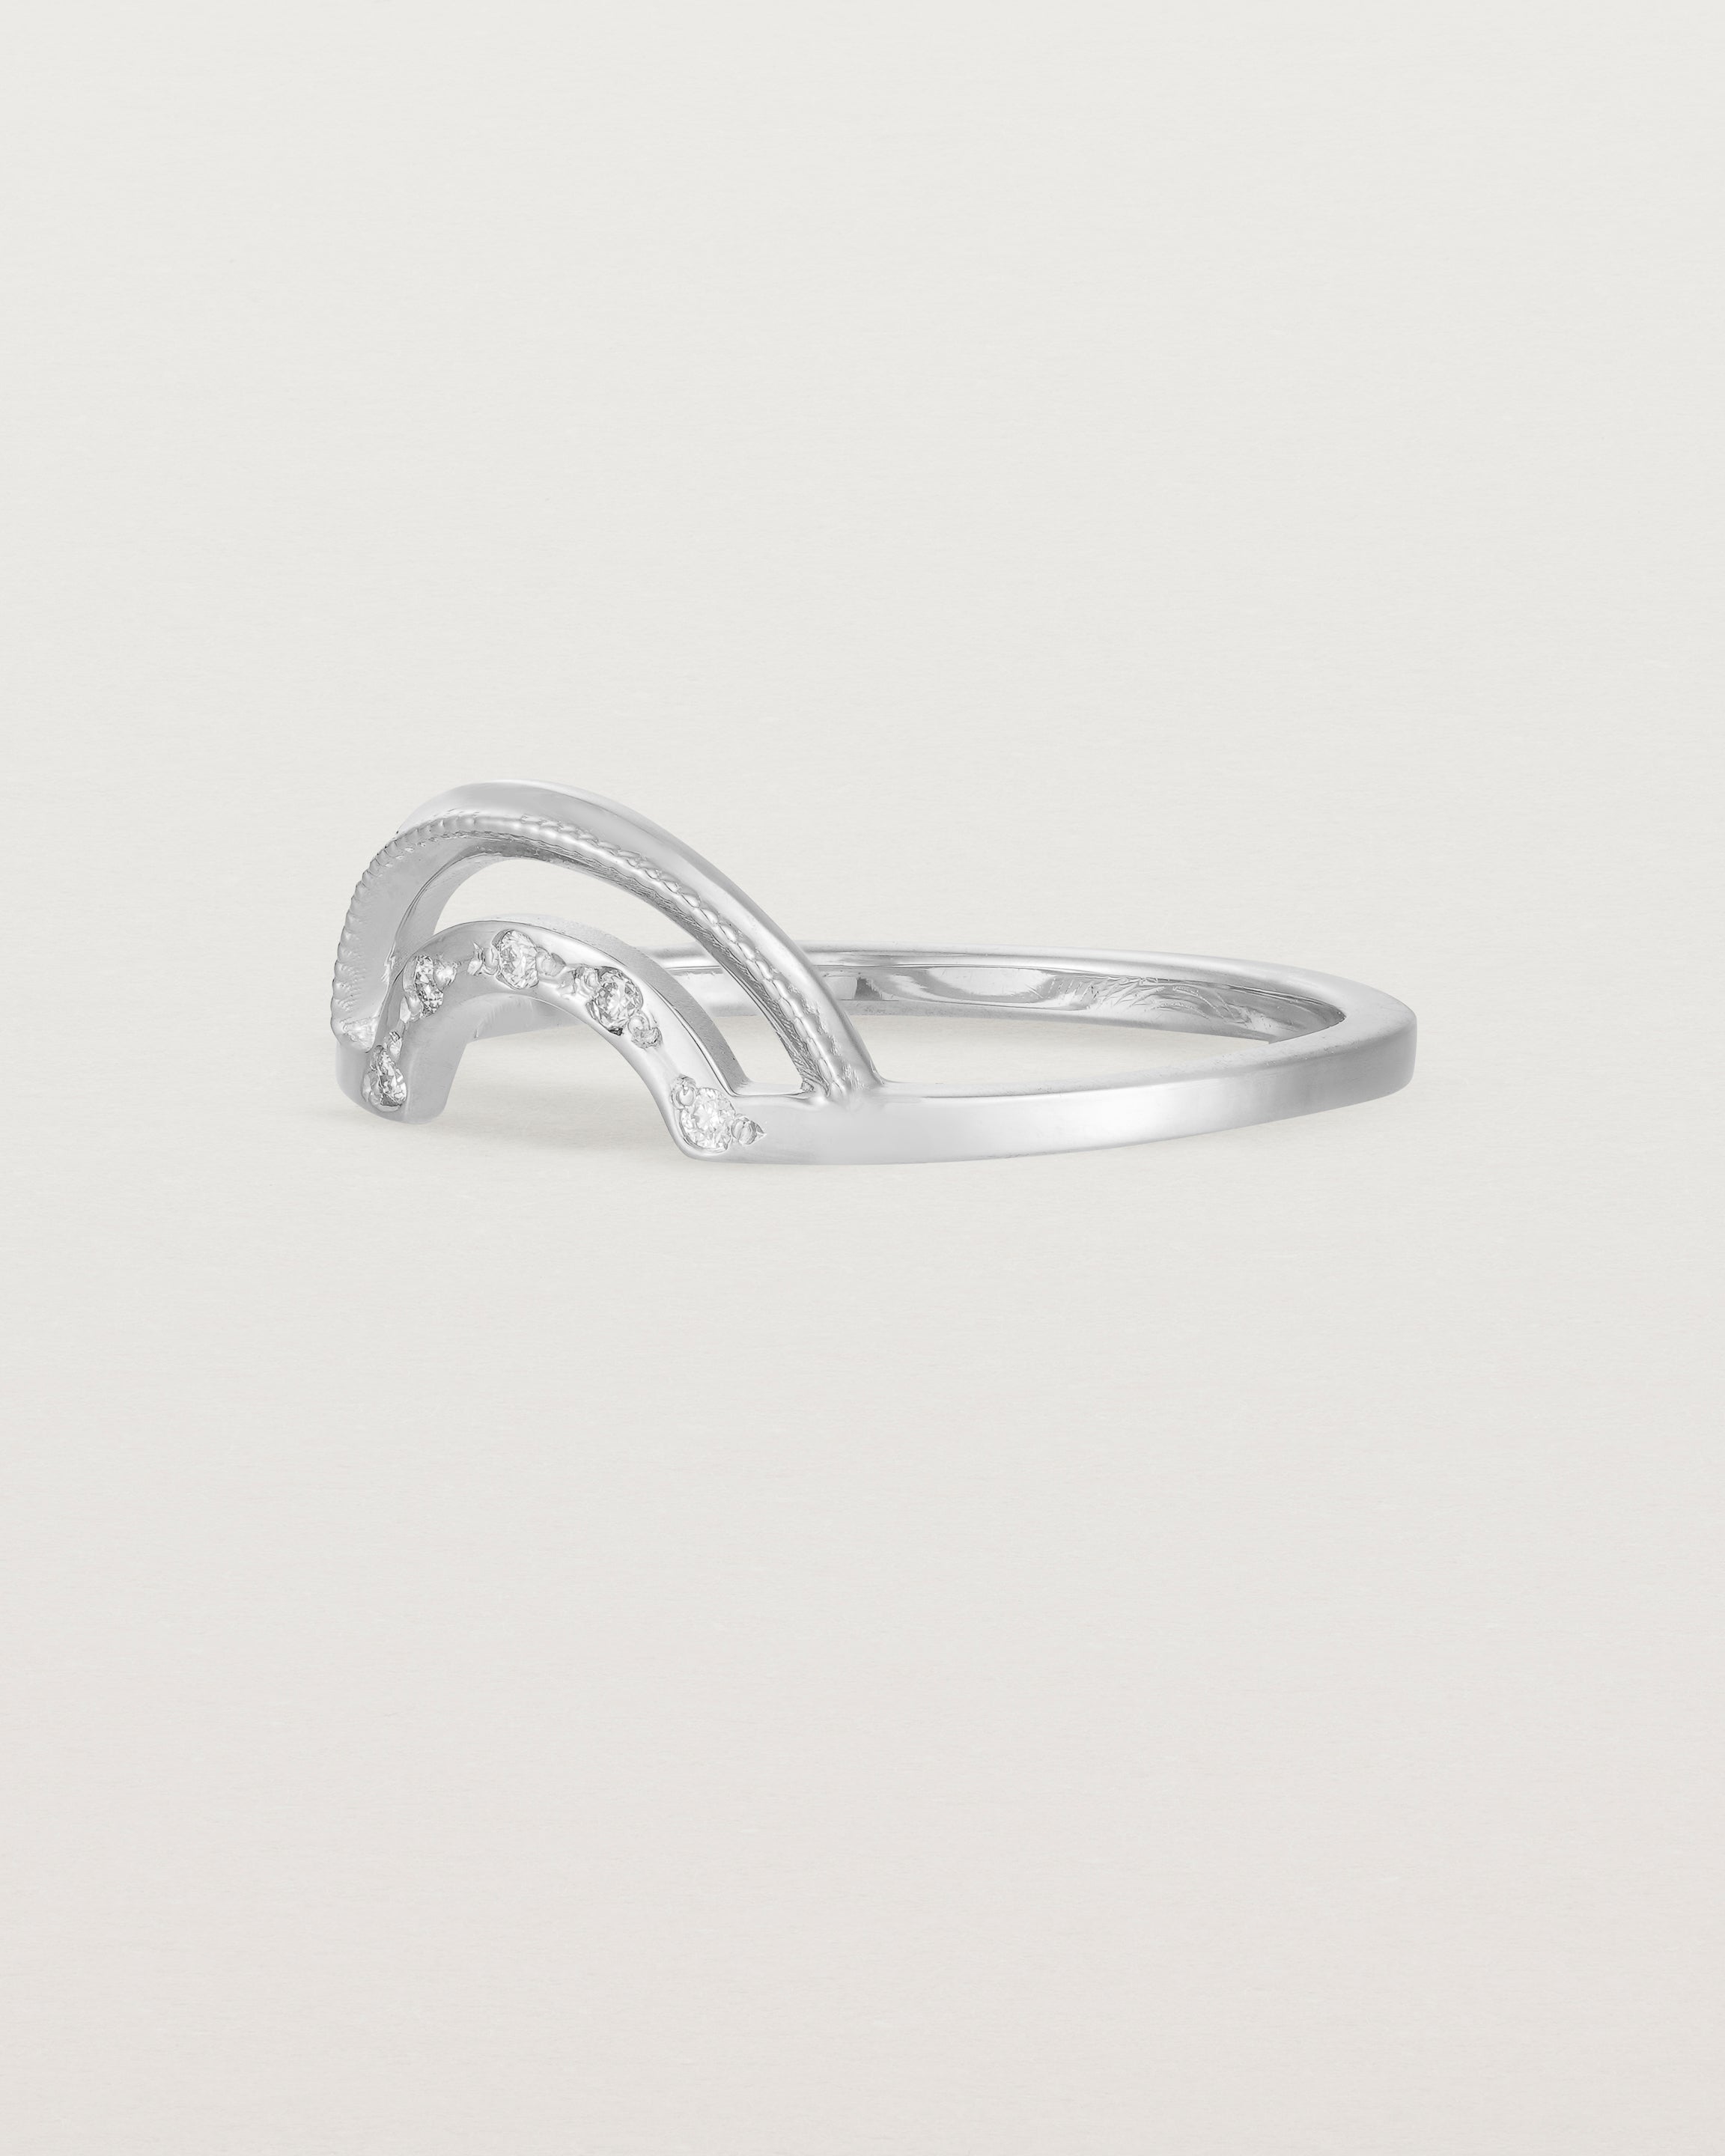 The side view of a double arc crown ring with white diamonds adoring the inner arc - crafted in white gold. 